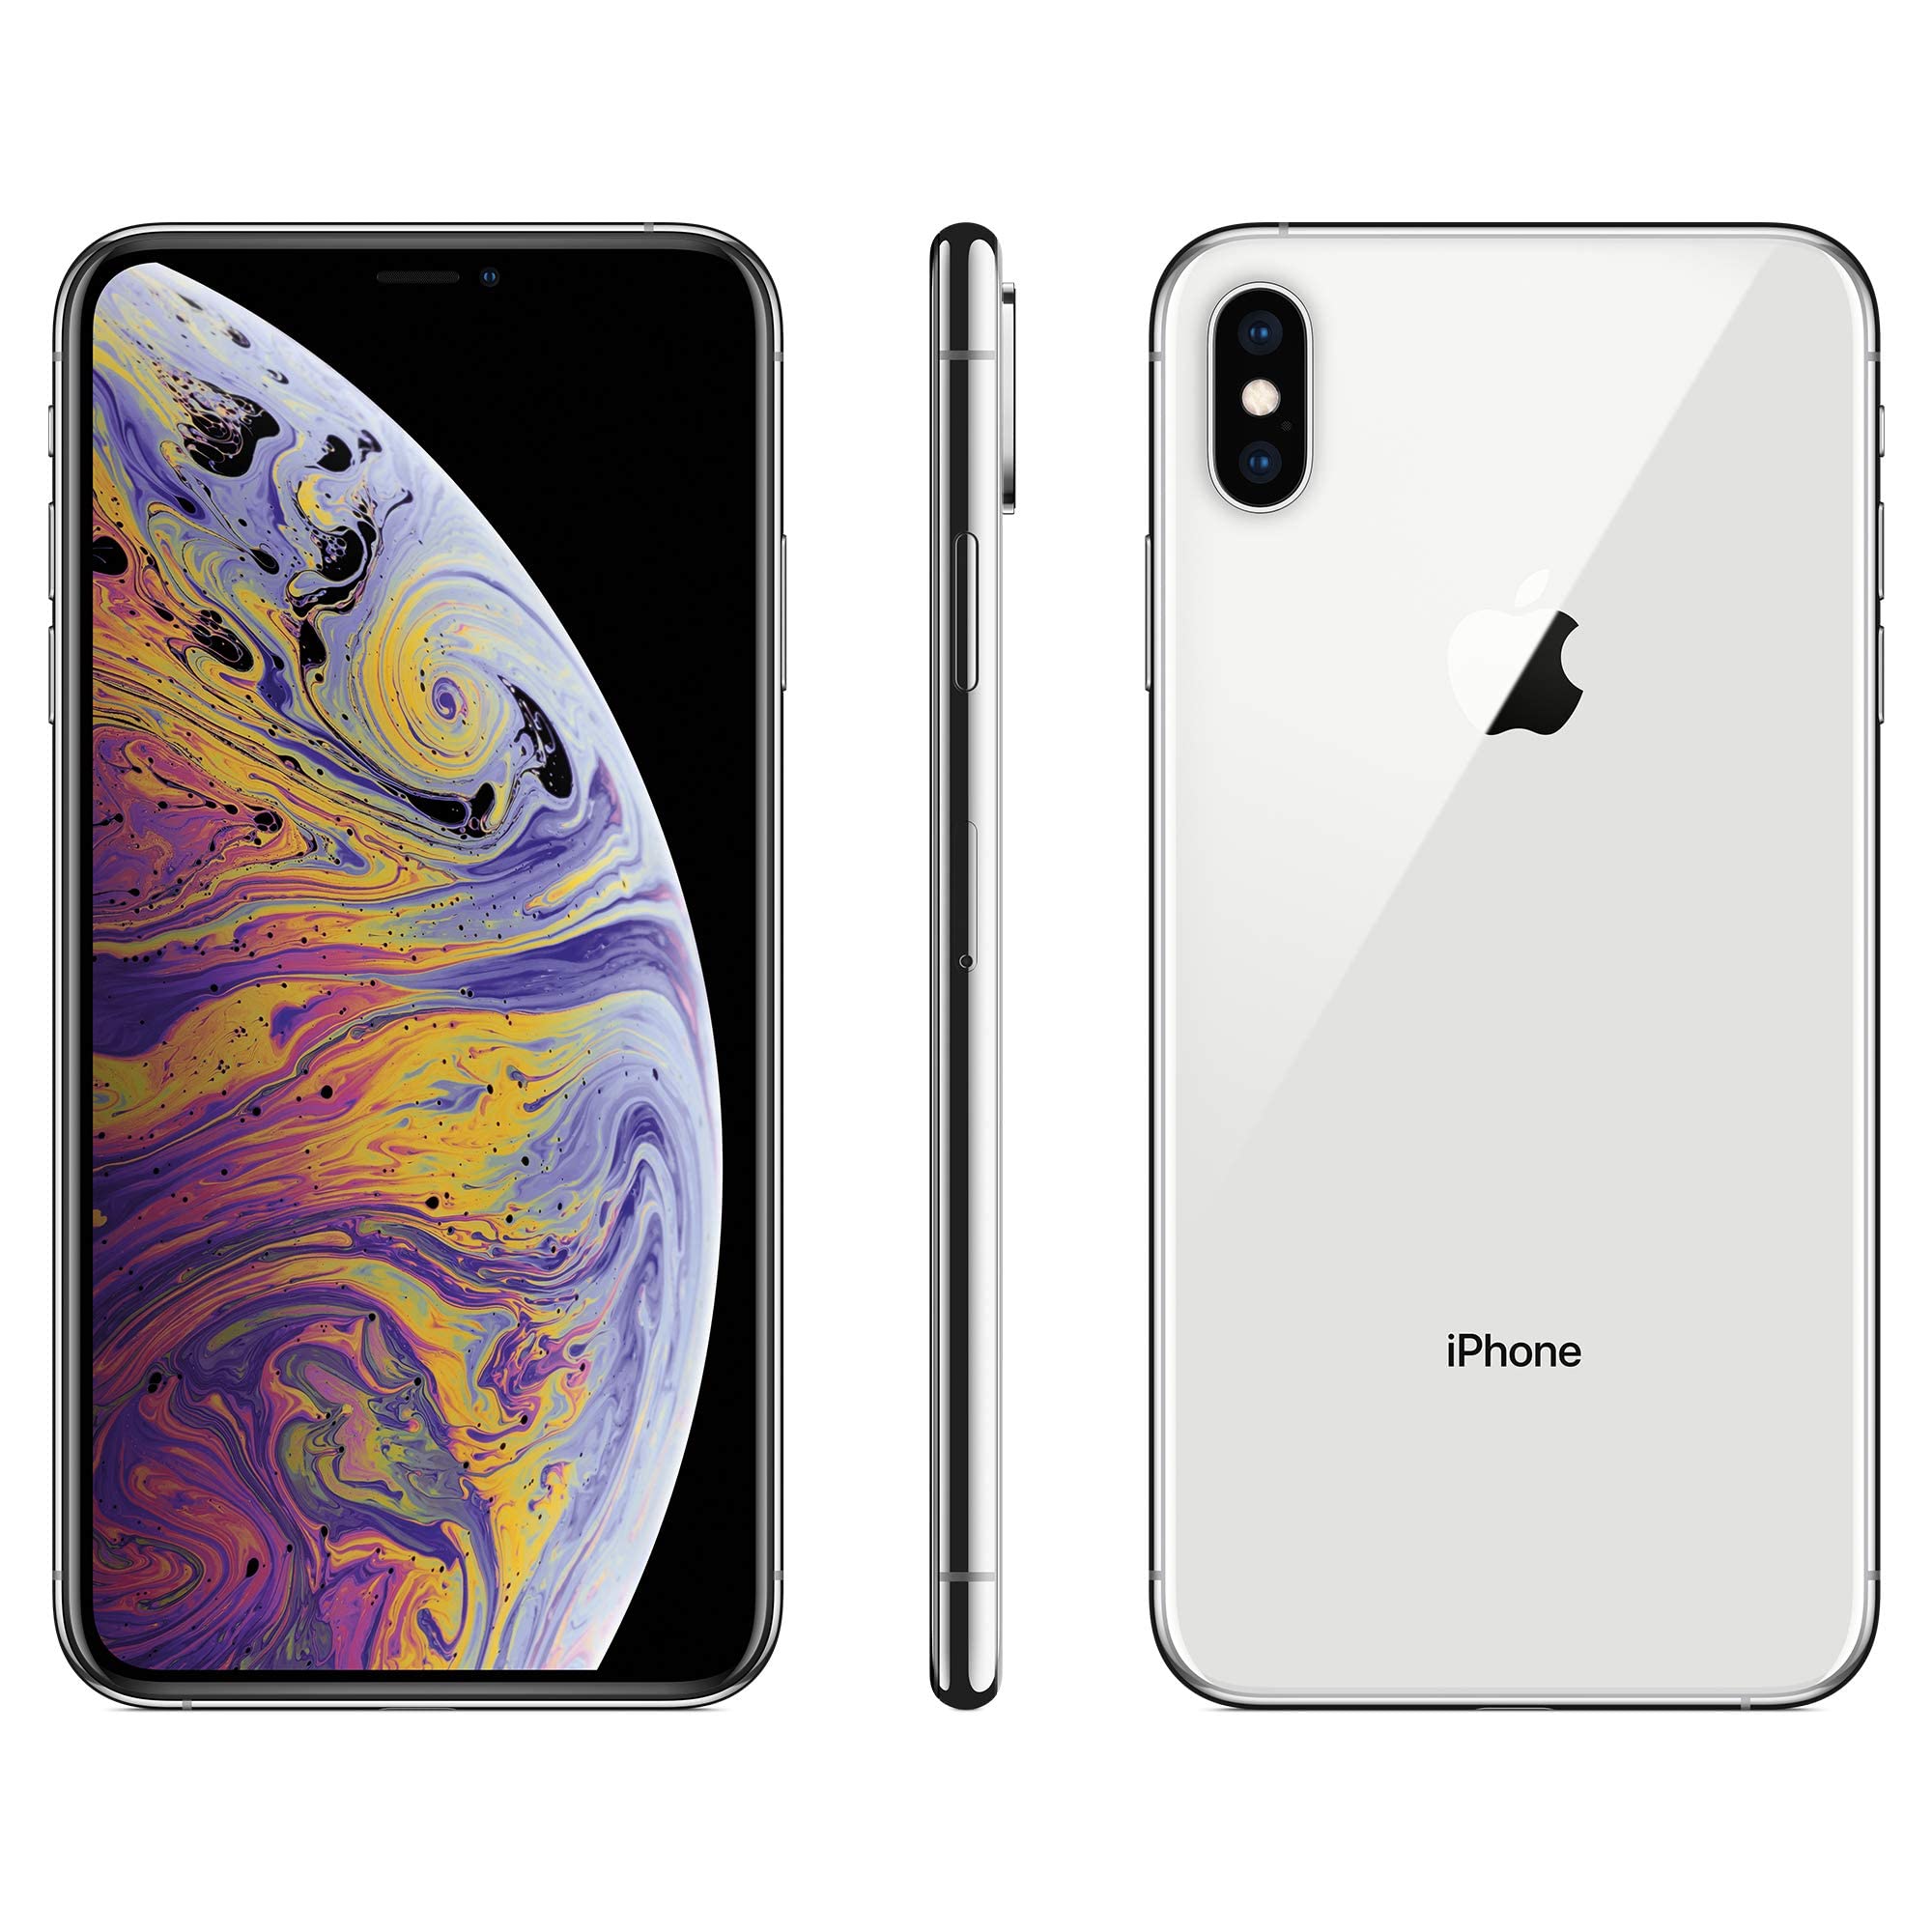 iphone-xs-price-shock-apple-banks-on-cheaper-iphones-for-india-win